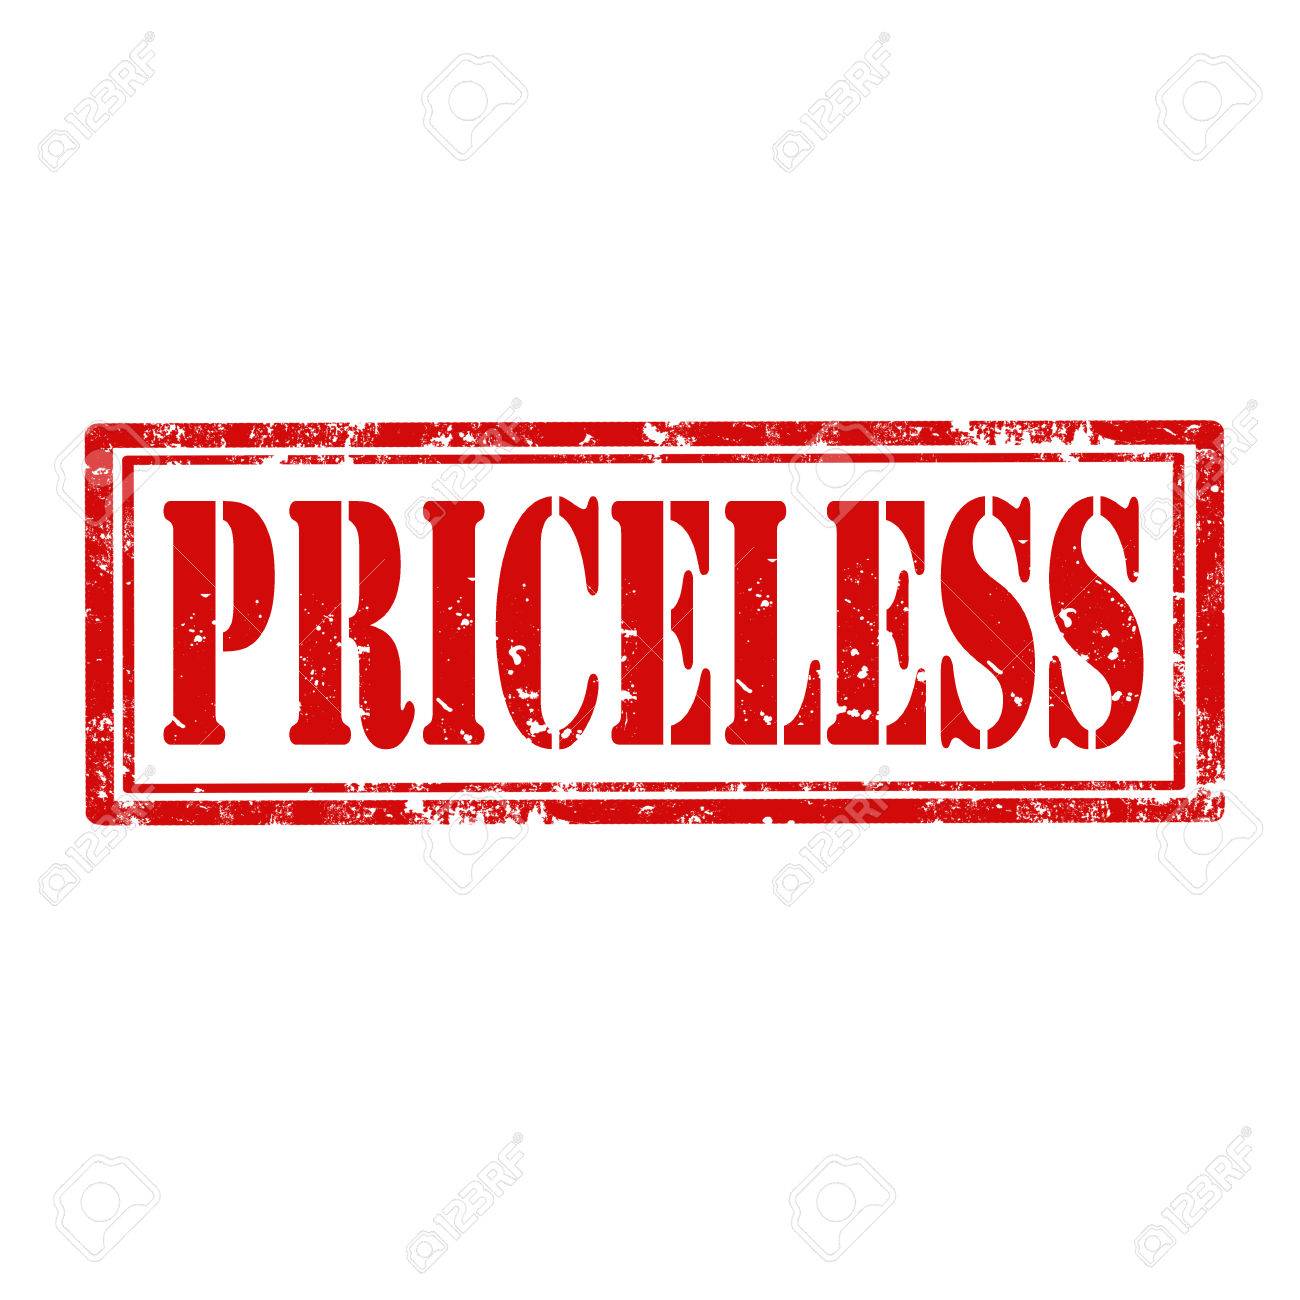 26502169-grunge-rubber-stamp-with-word-priceless-vector-illustration.jpg